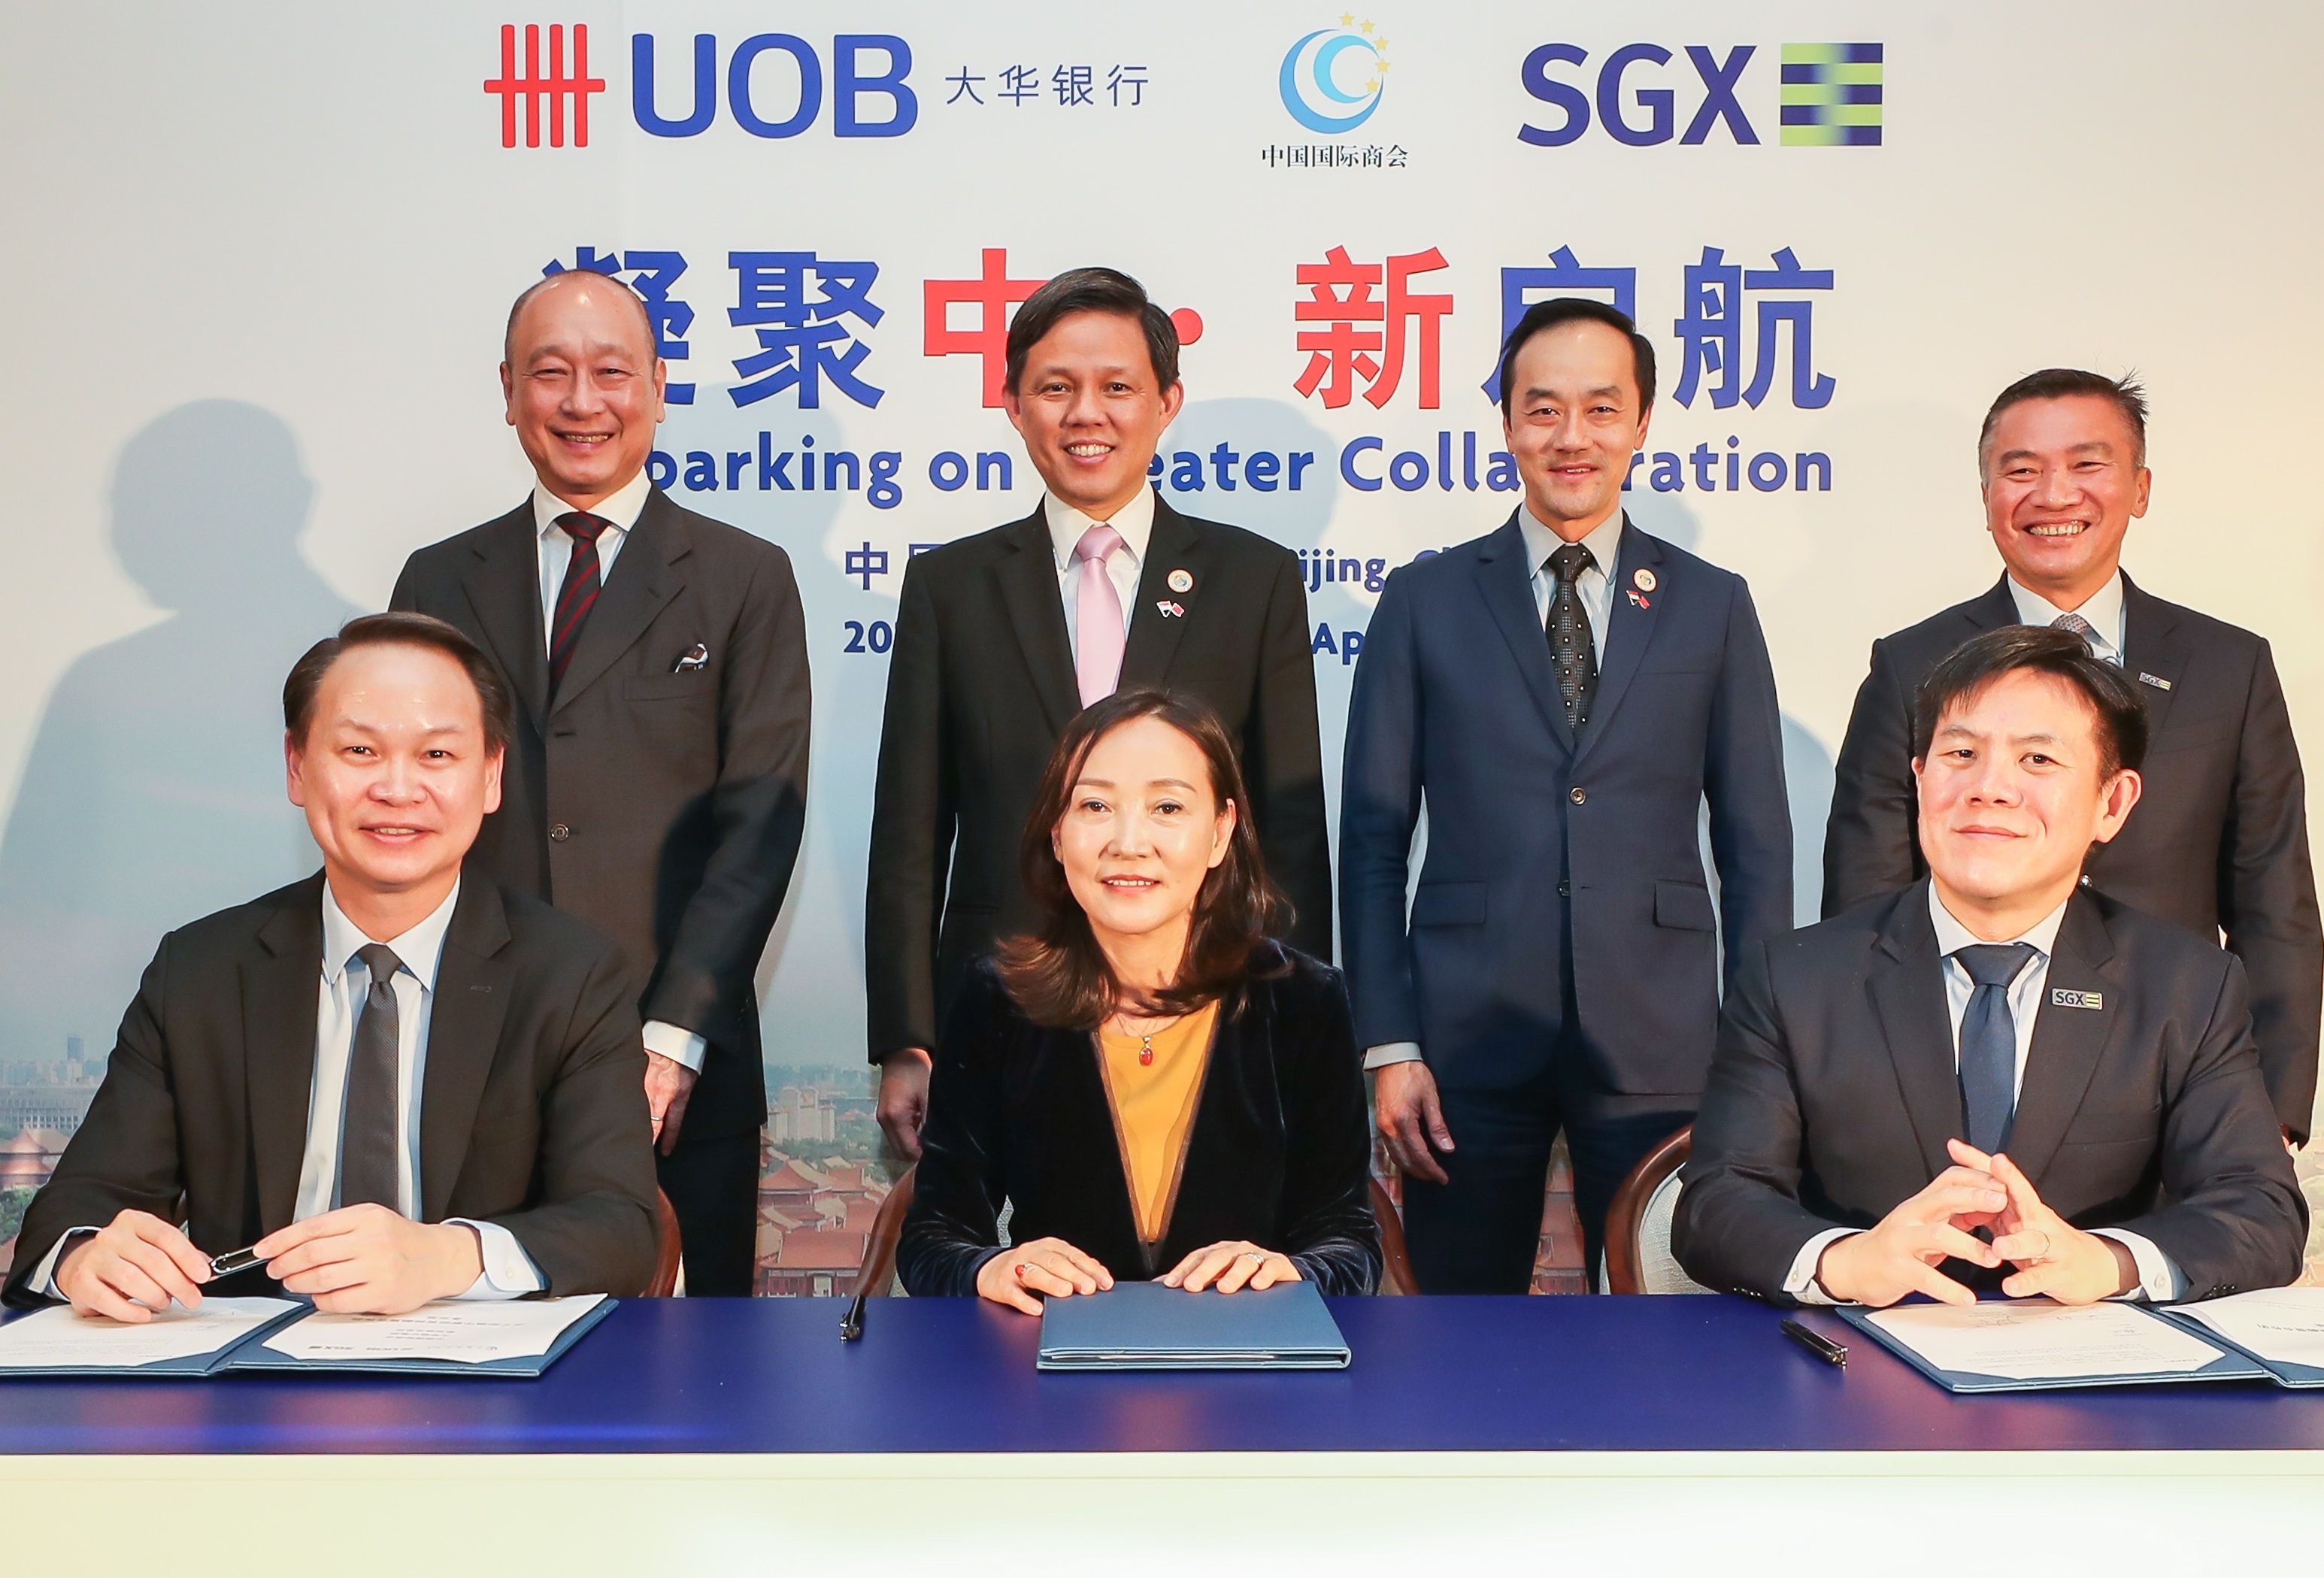 Wee Ee Cheong, Deputy Chairman and CEO, UOB; Chan Chun Sing, Singapore Minister for Trade and Industry; Dr Koh Poh Koon, Senior Minister of State for Trade and Industry; Loh Boon Chye, CEO, SGX; stand left to right, with UOB, CCOIC and SGX executives